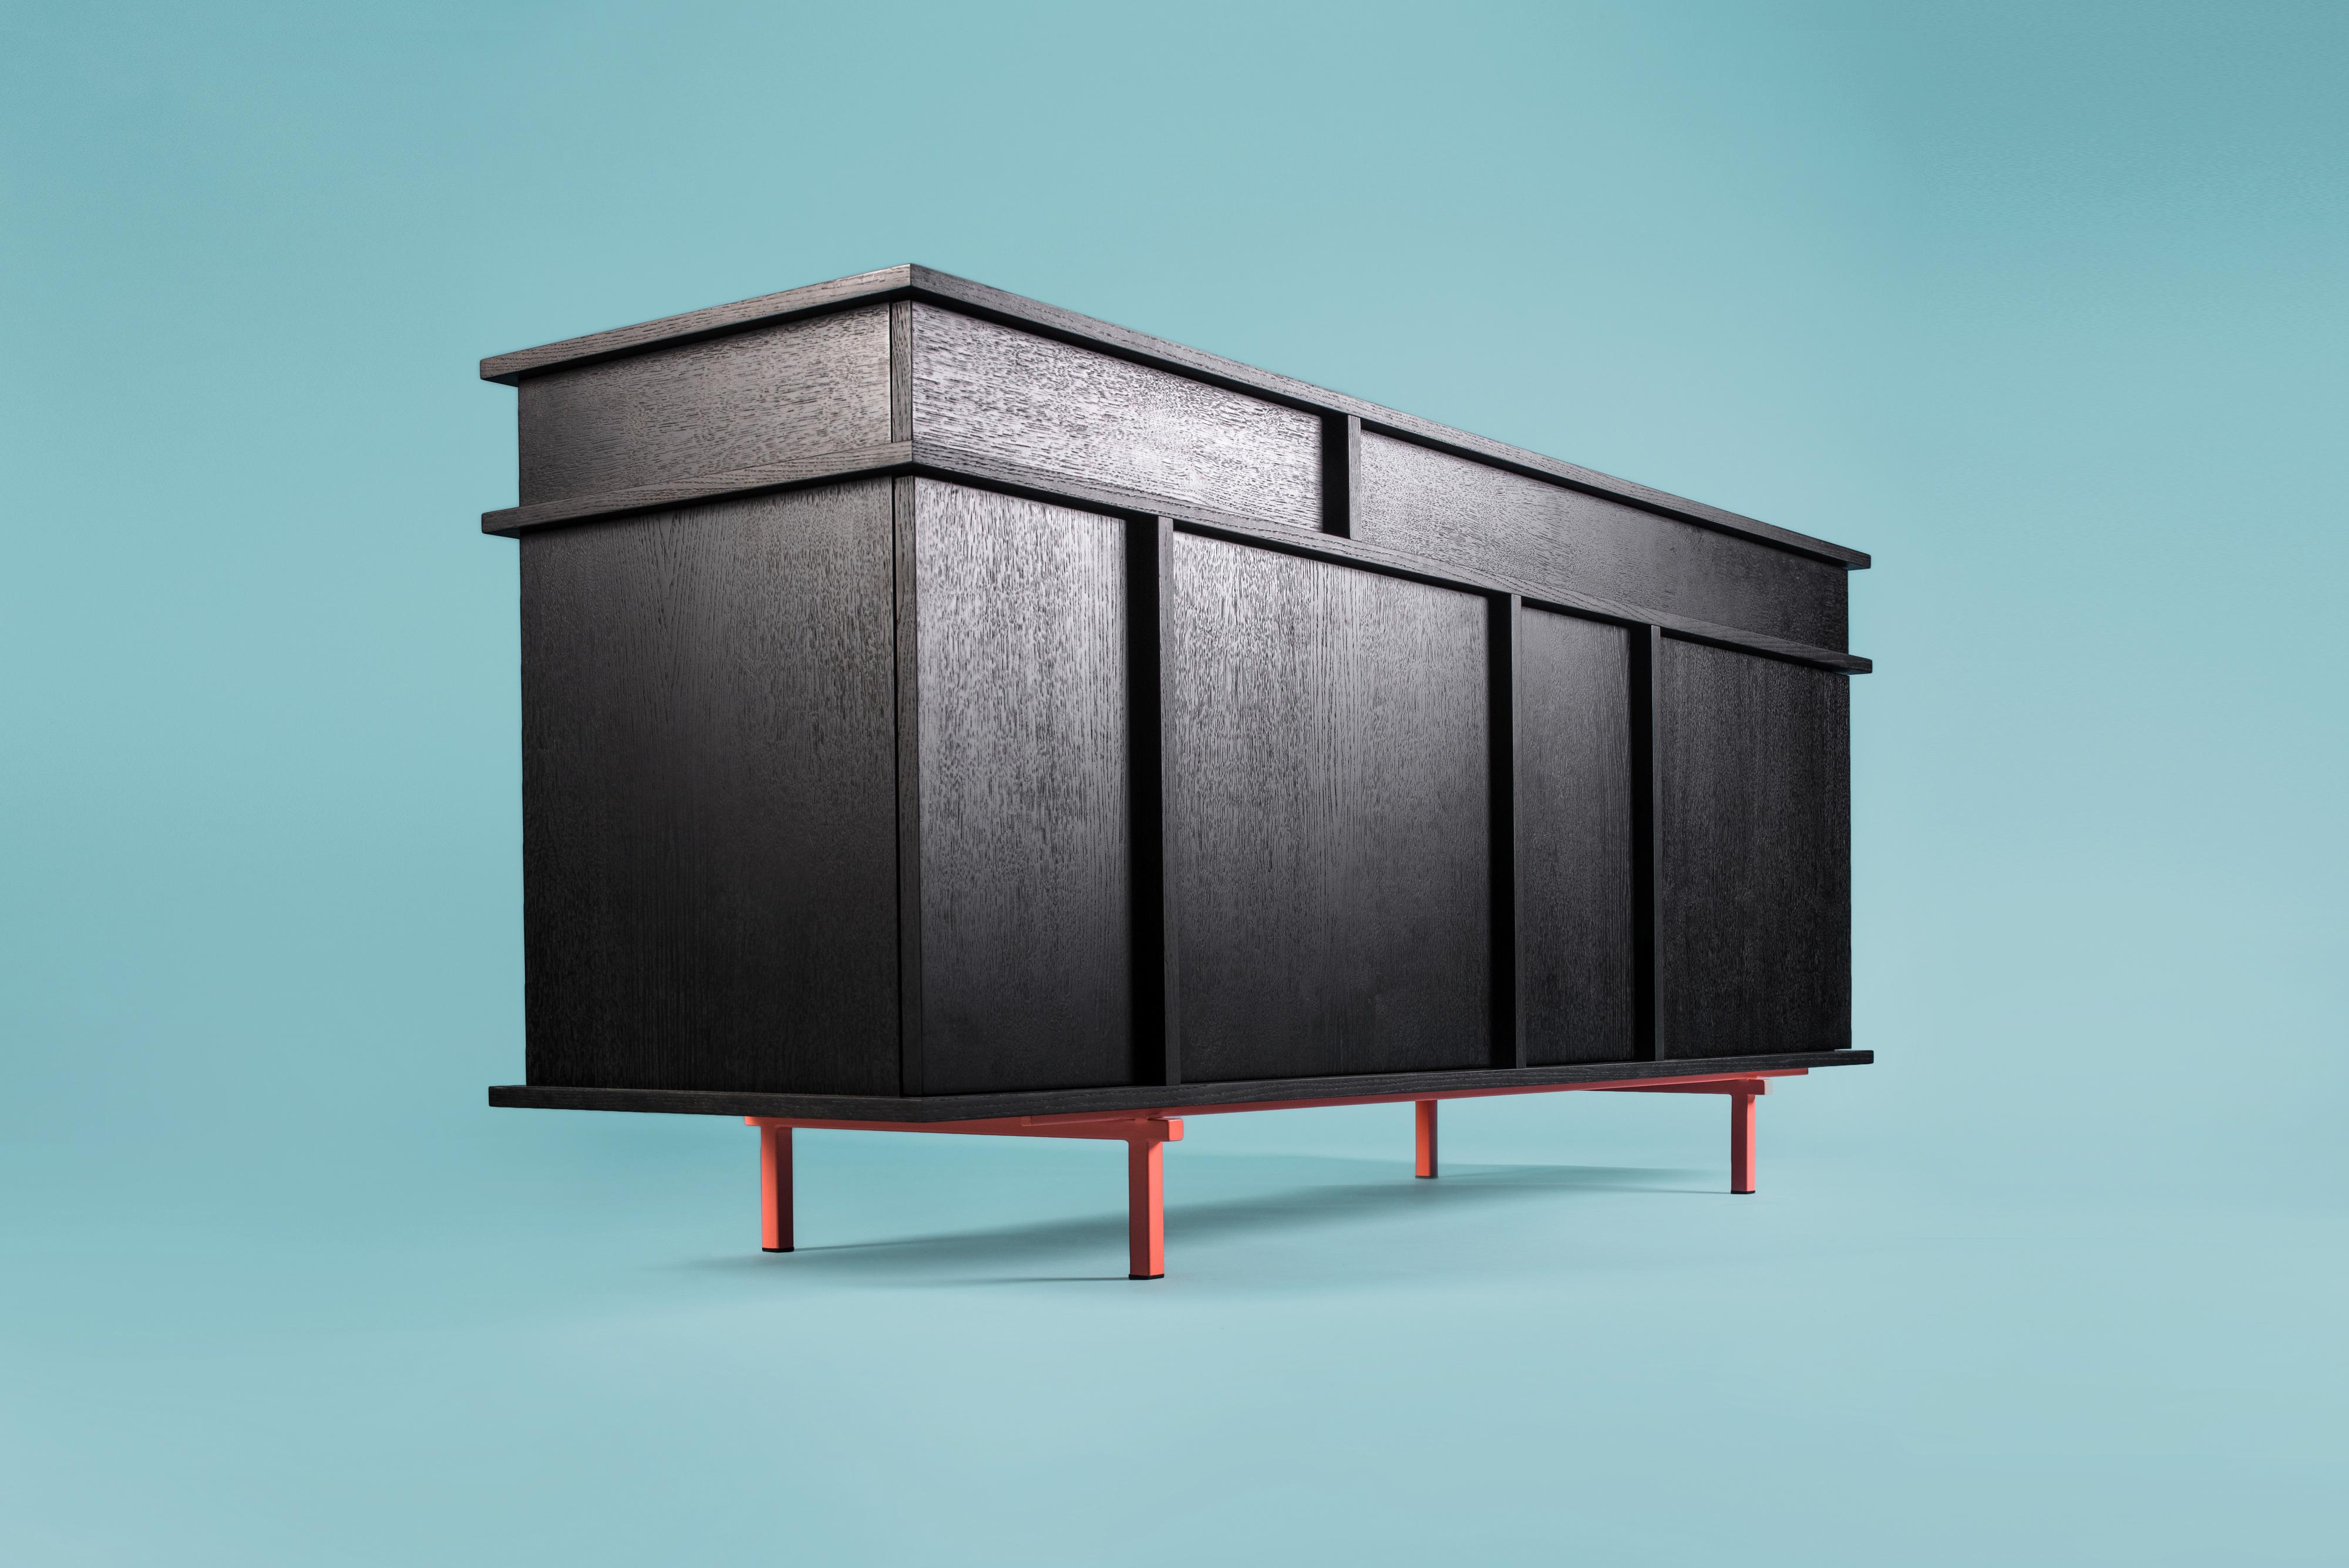 UMAMI U1 black oak cabinet by Phormy
Dimensions: D 46 x W 162 x H 83 cm.
Materials: Oak, powder coated steel base.

Different materials and sizes available.

UMAMI, (or umame, from jap. ? ?) - one of the five basic tastes recognized by man.